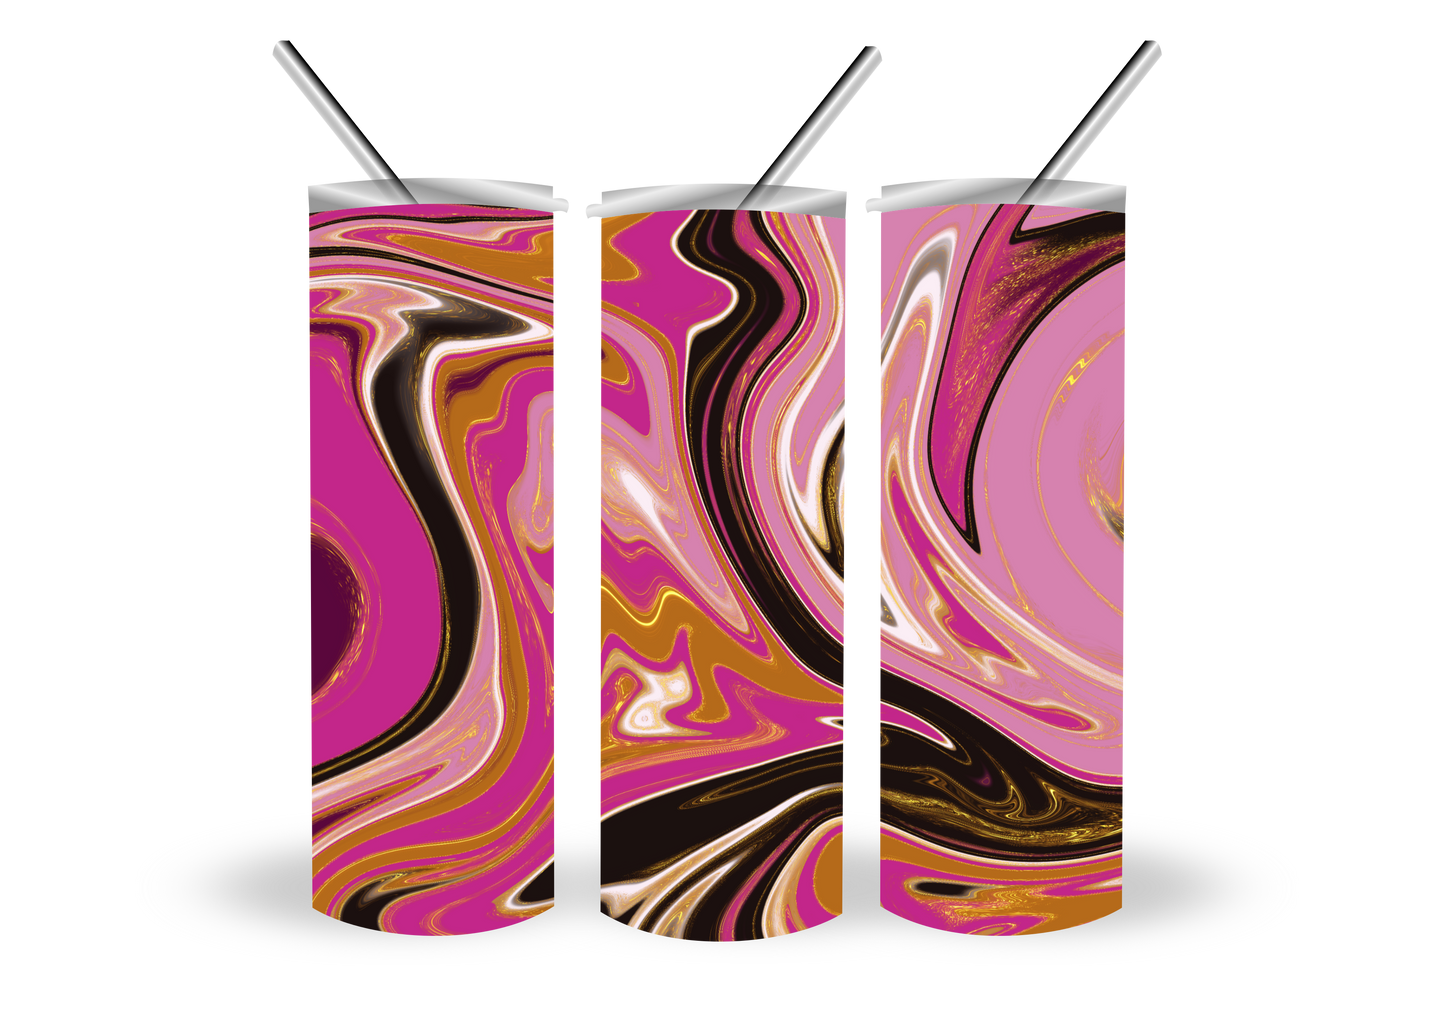 13 pieces of 20 oz tumbler backgrounds